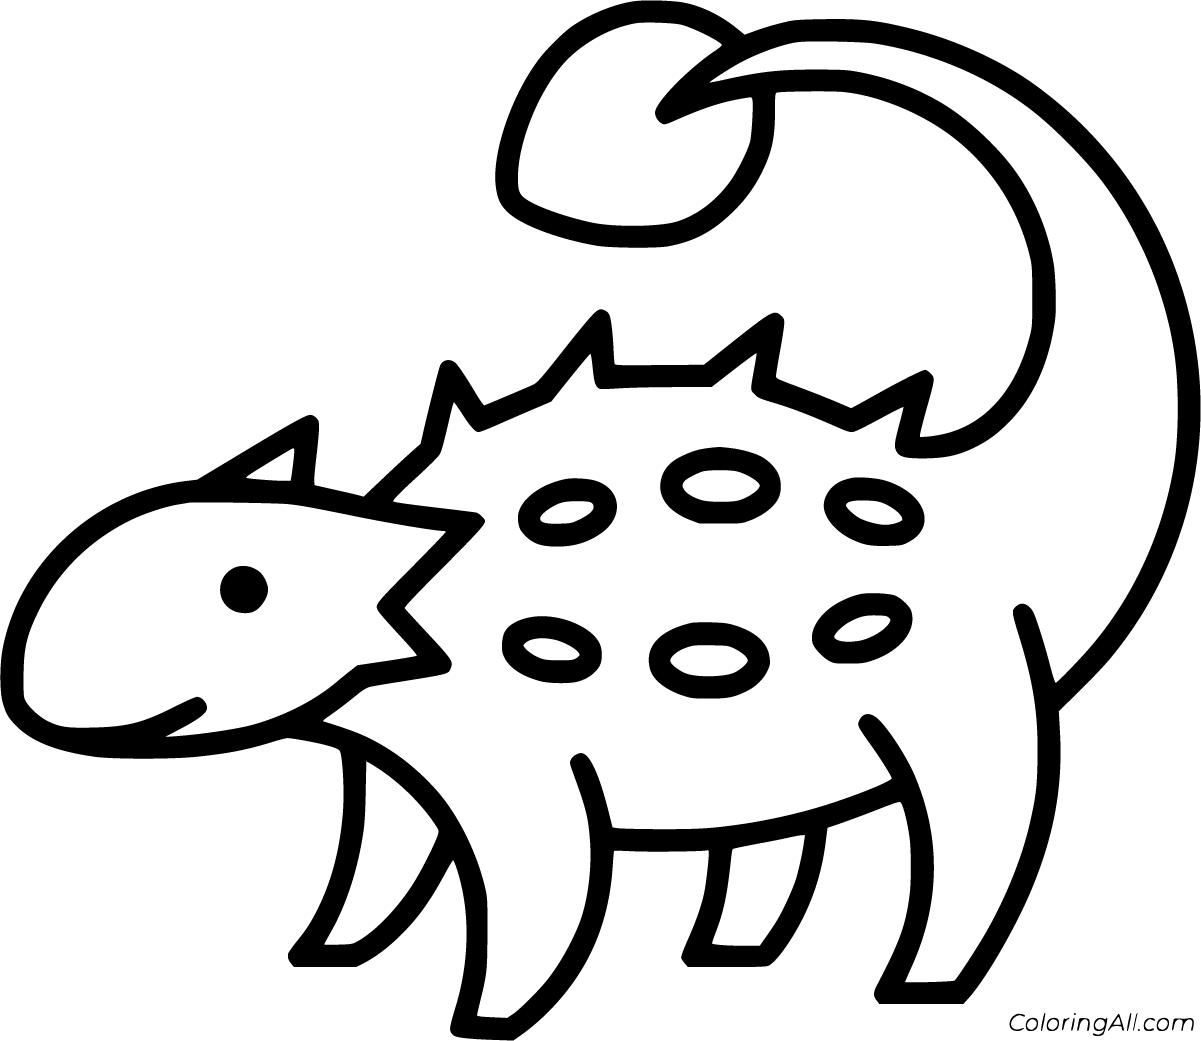 Download Ankylosaurus Coloring Pages - ColoringAll